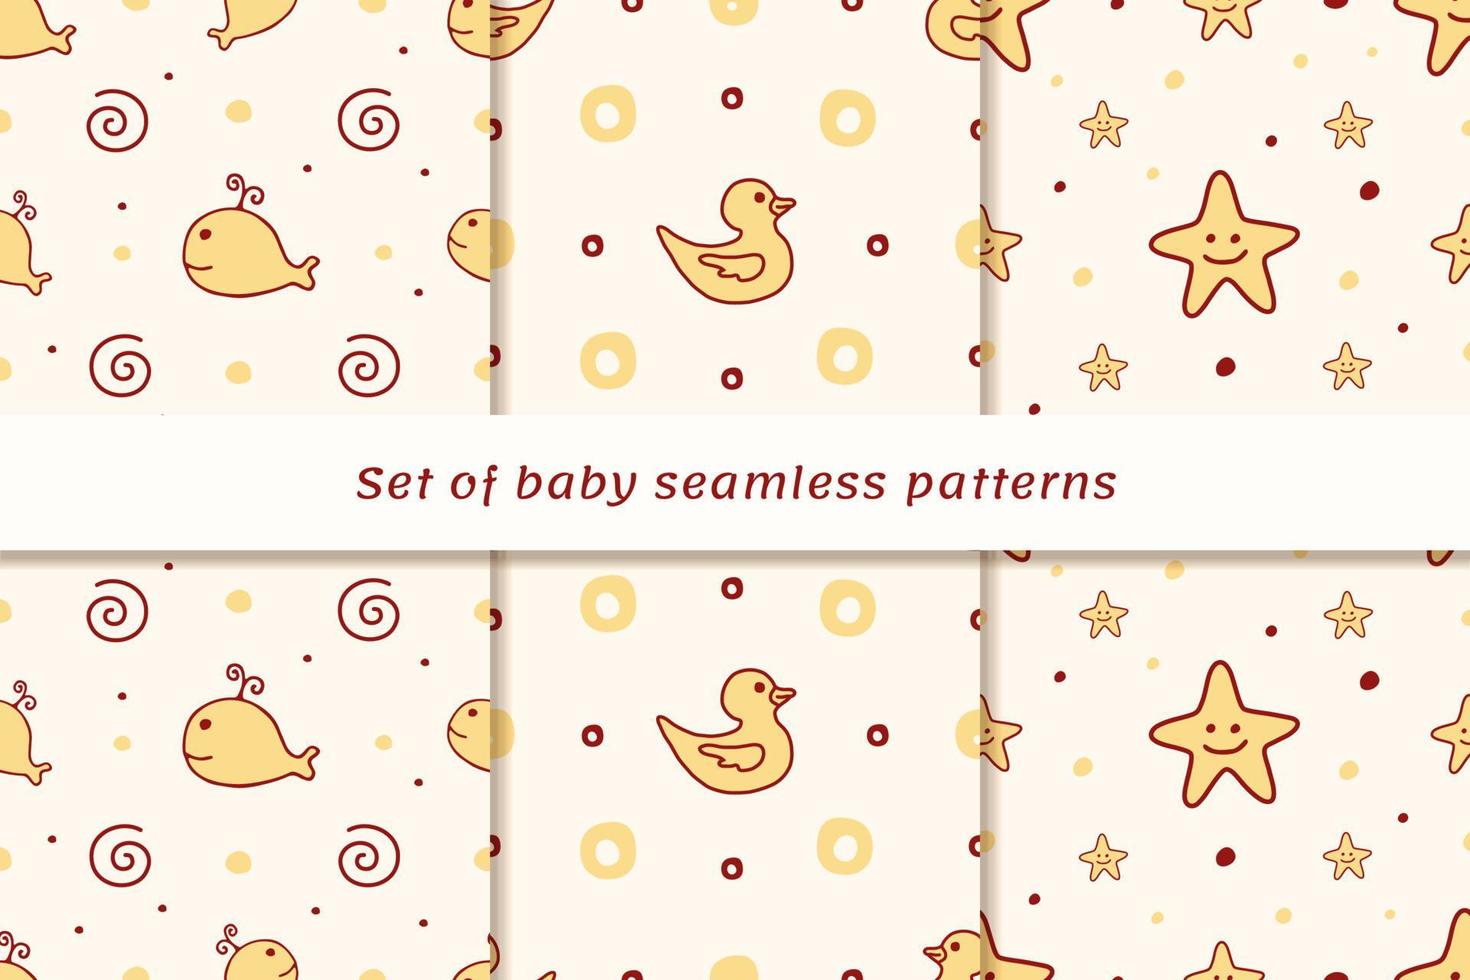 Set of three Seamless pattern with cute whales, ducks and stars on yellow background. Good for baby textile, wallpaper or wrapping. vector